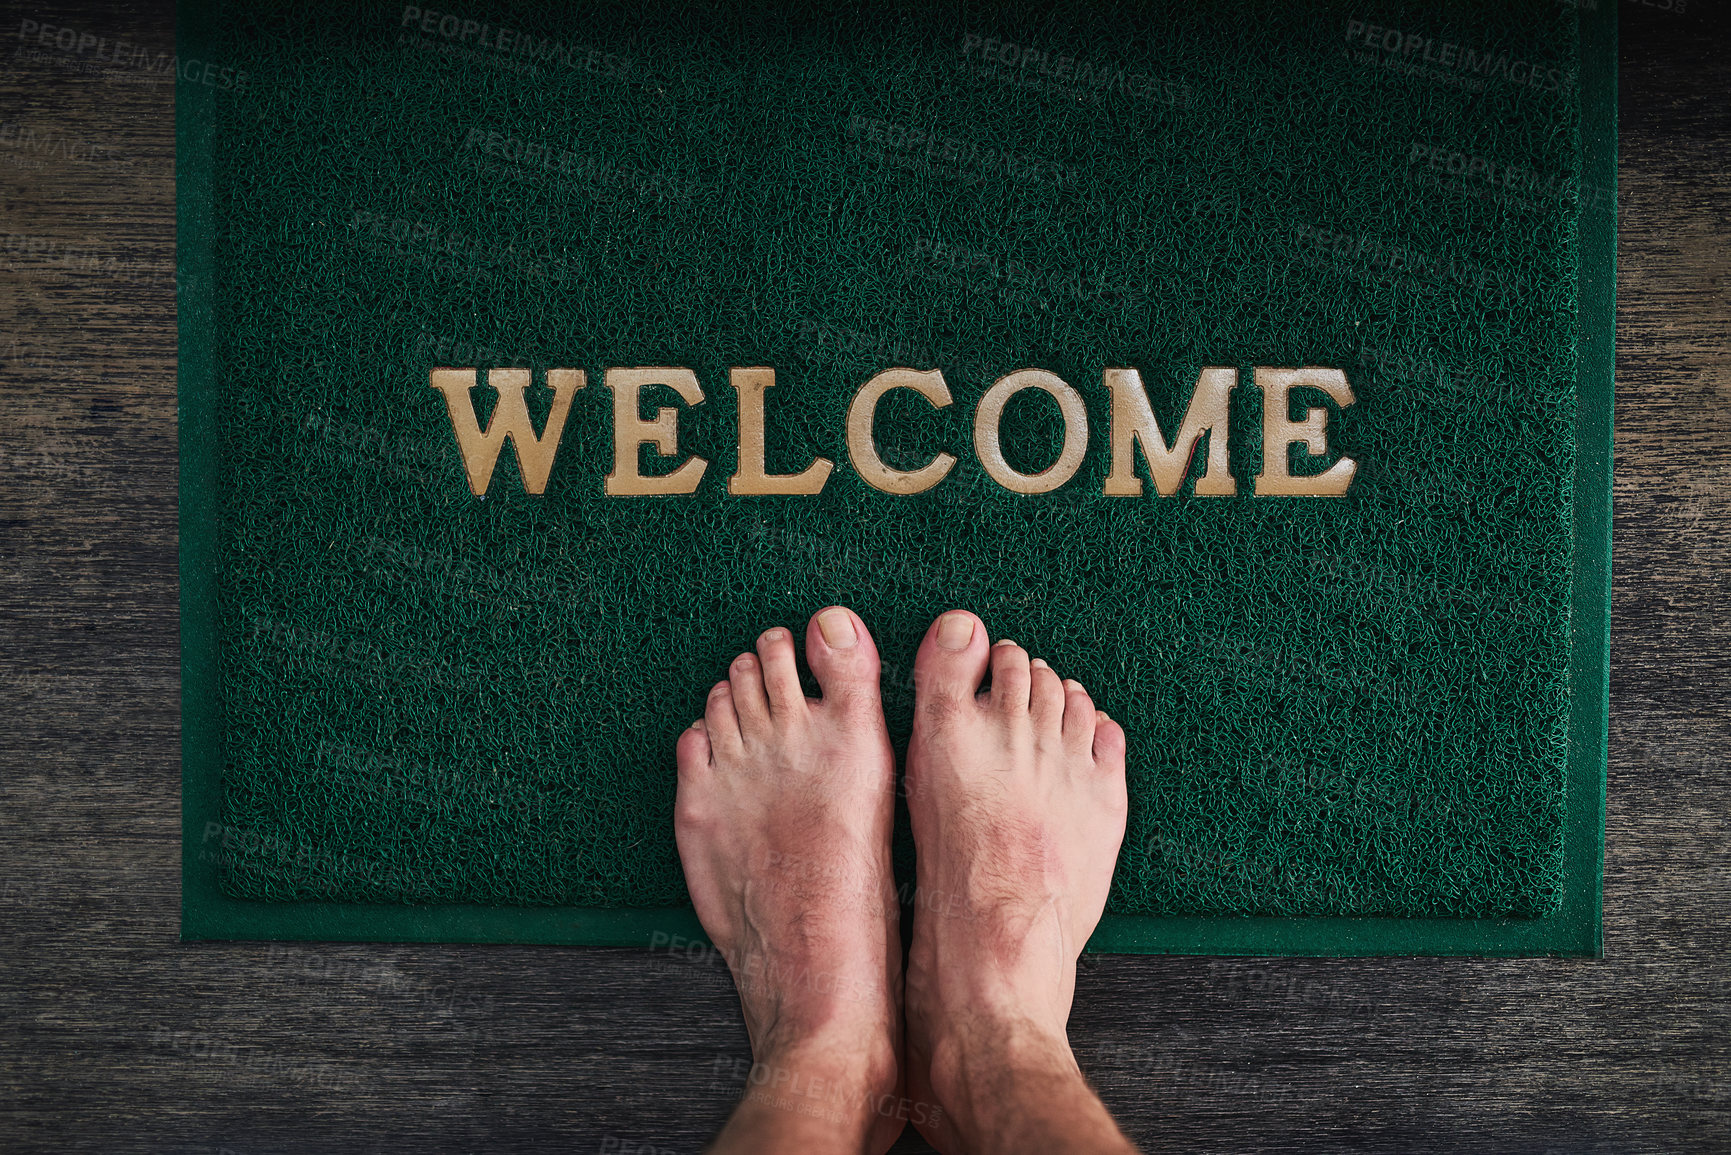 Buy stock photo High angle shot of a man's bare feet standing on a welcome mat